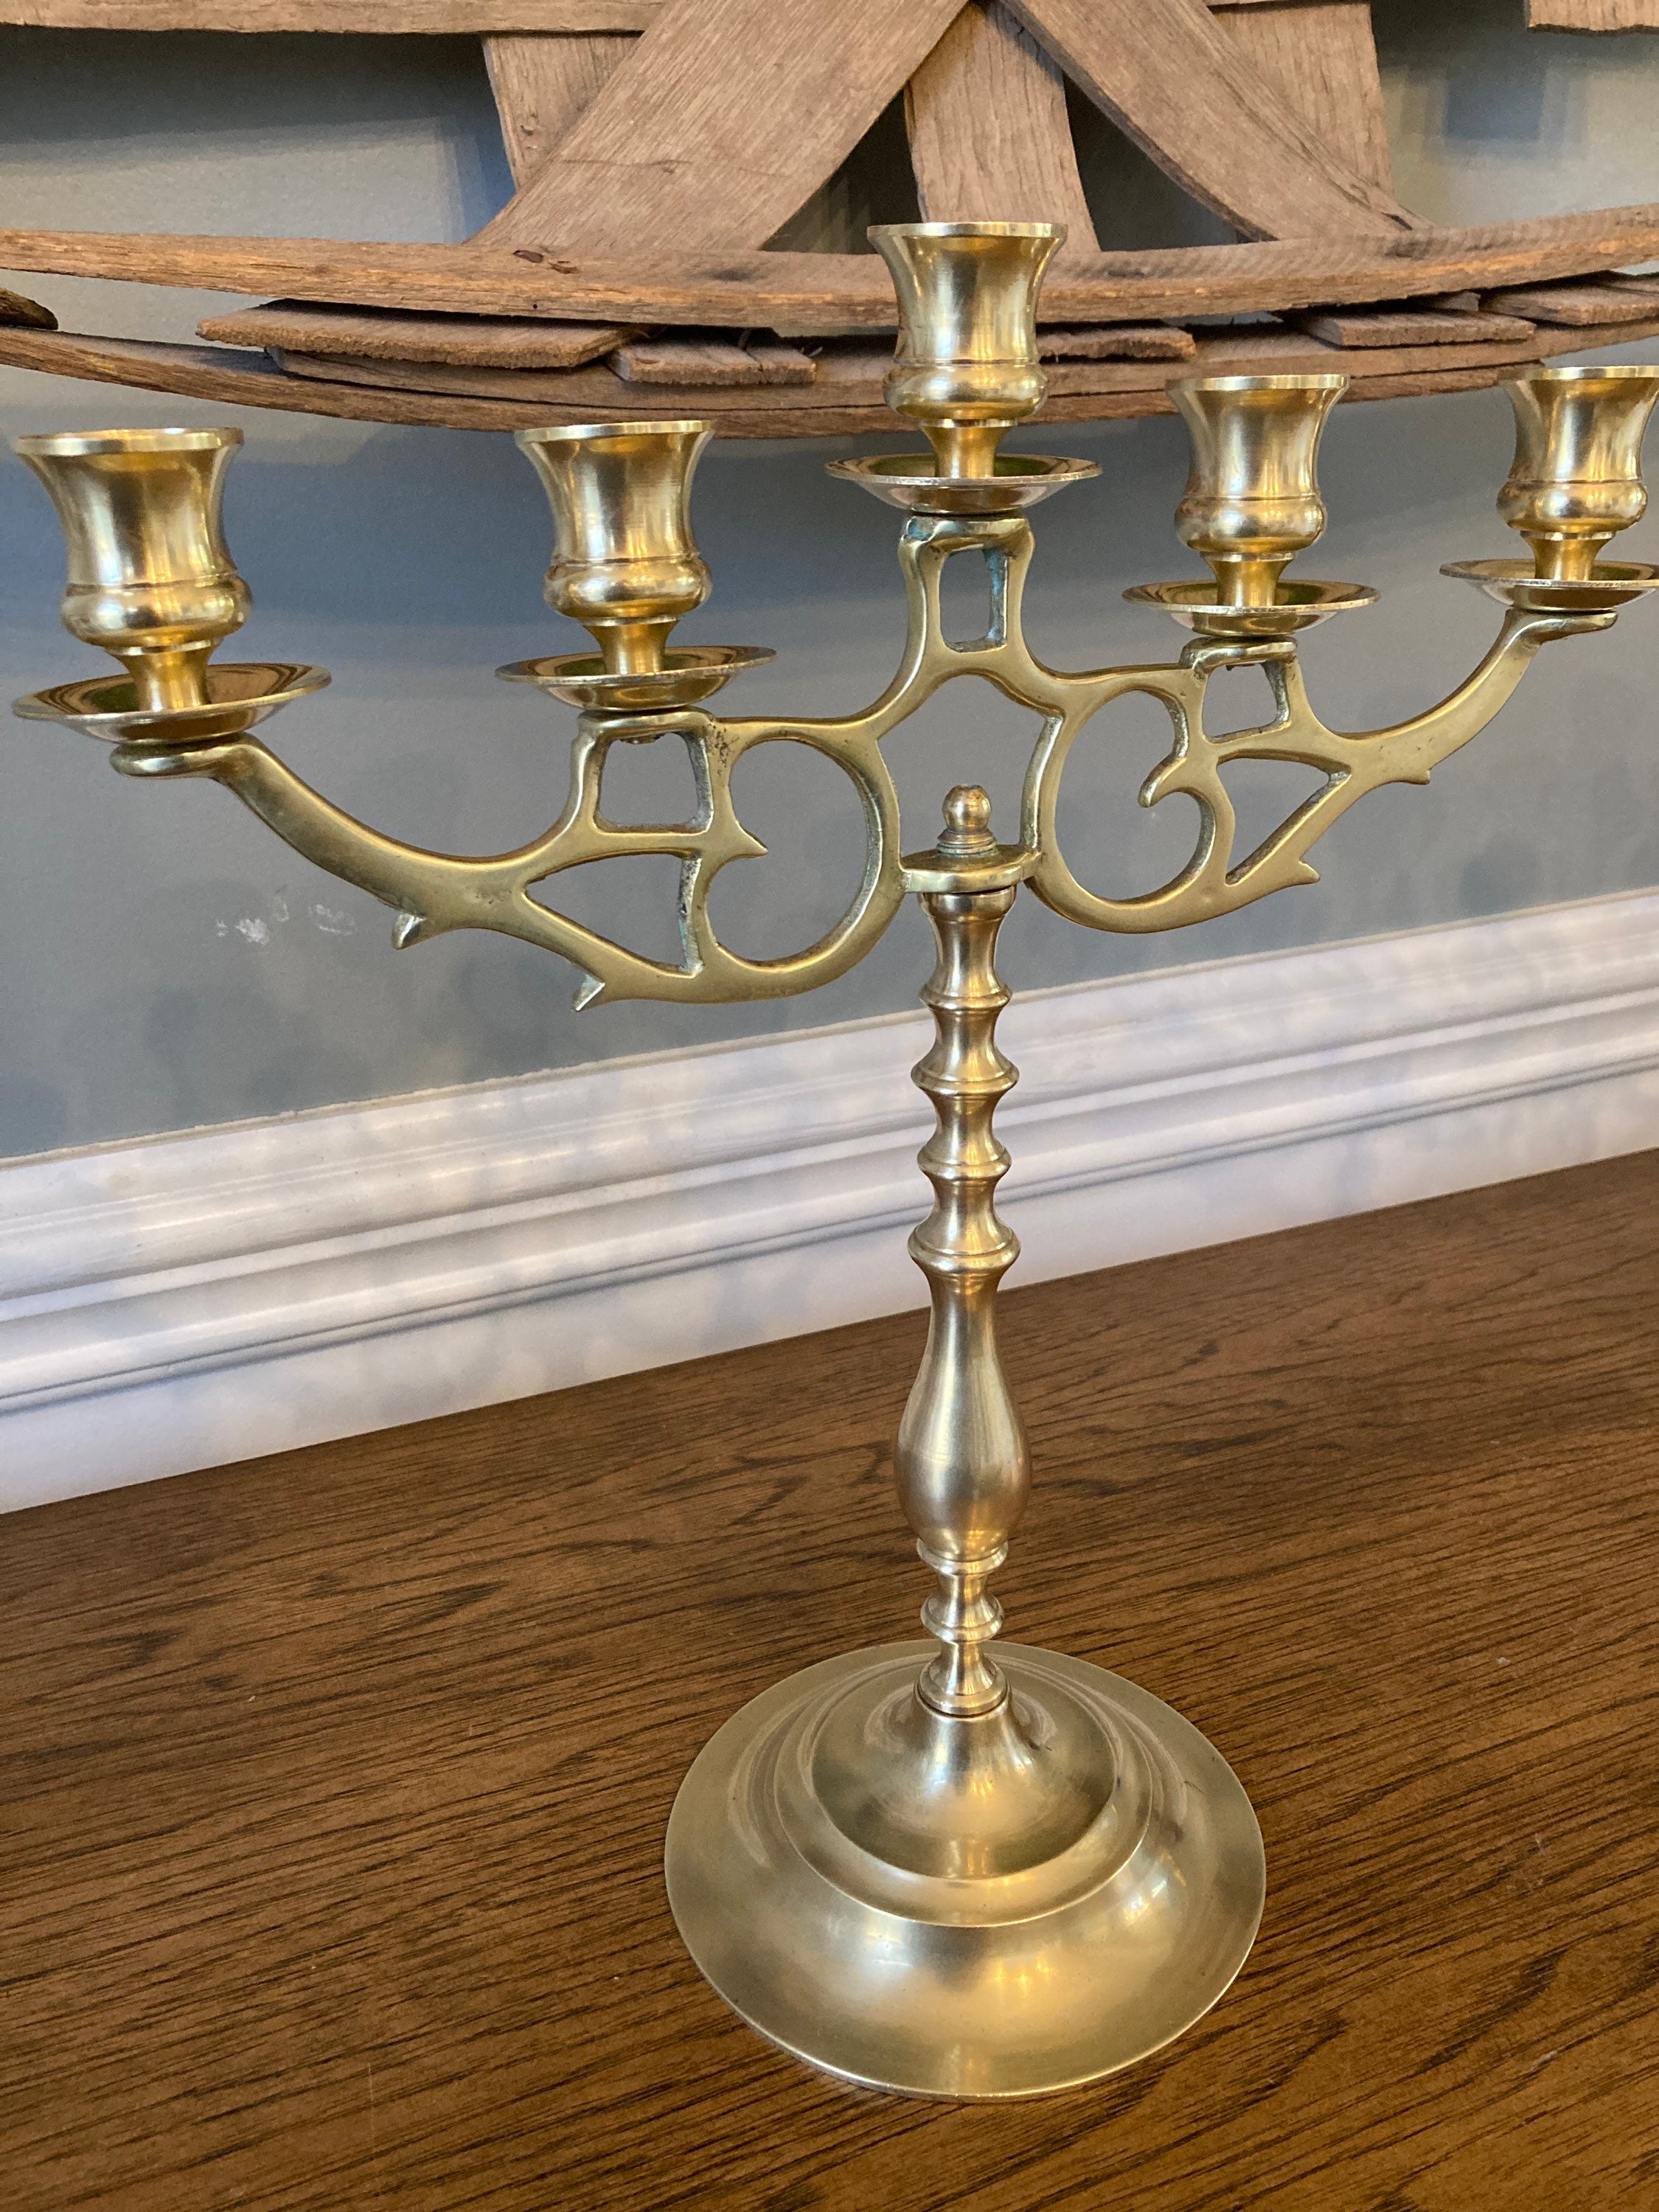 Brass Victorian 5 Candle Candelabra - Dead People's Stuff